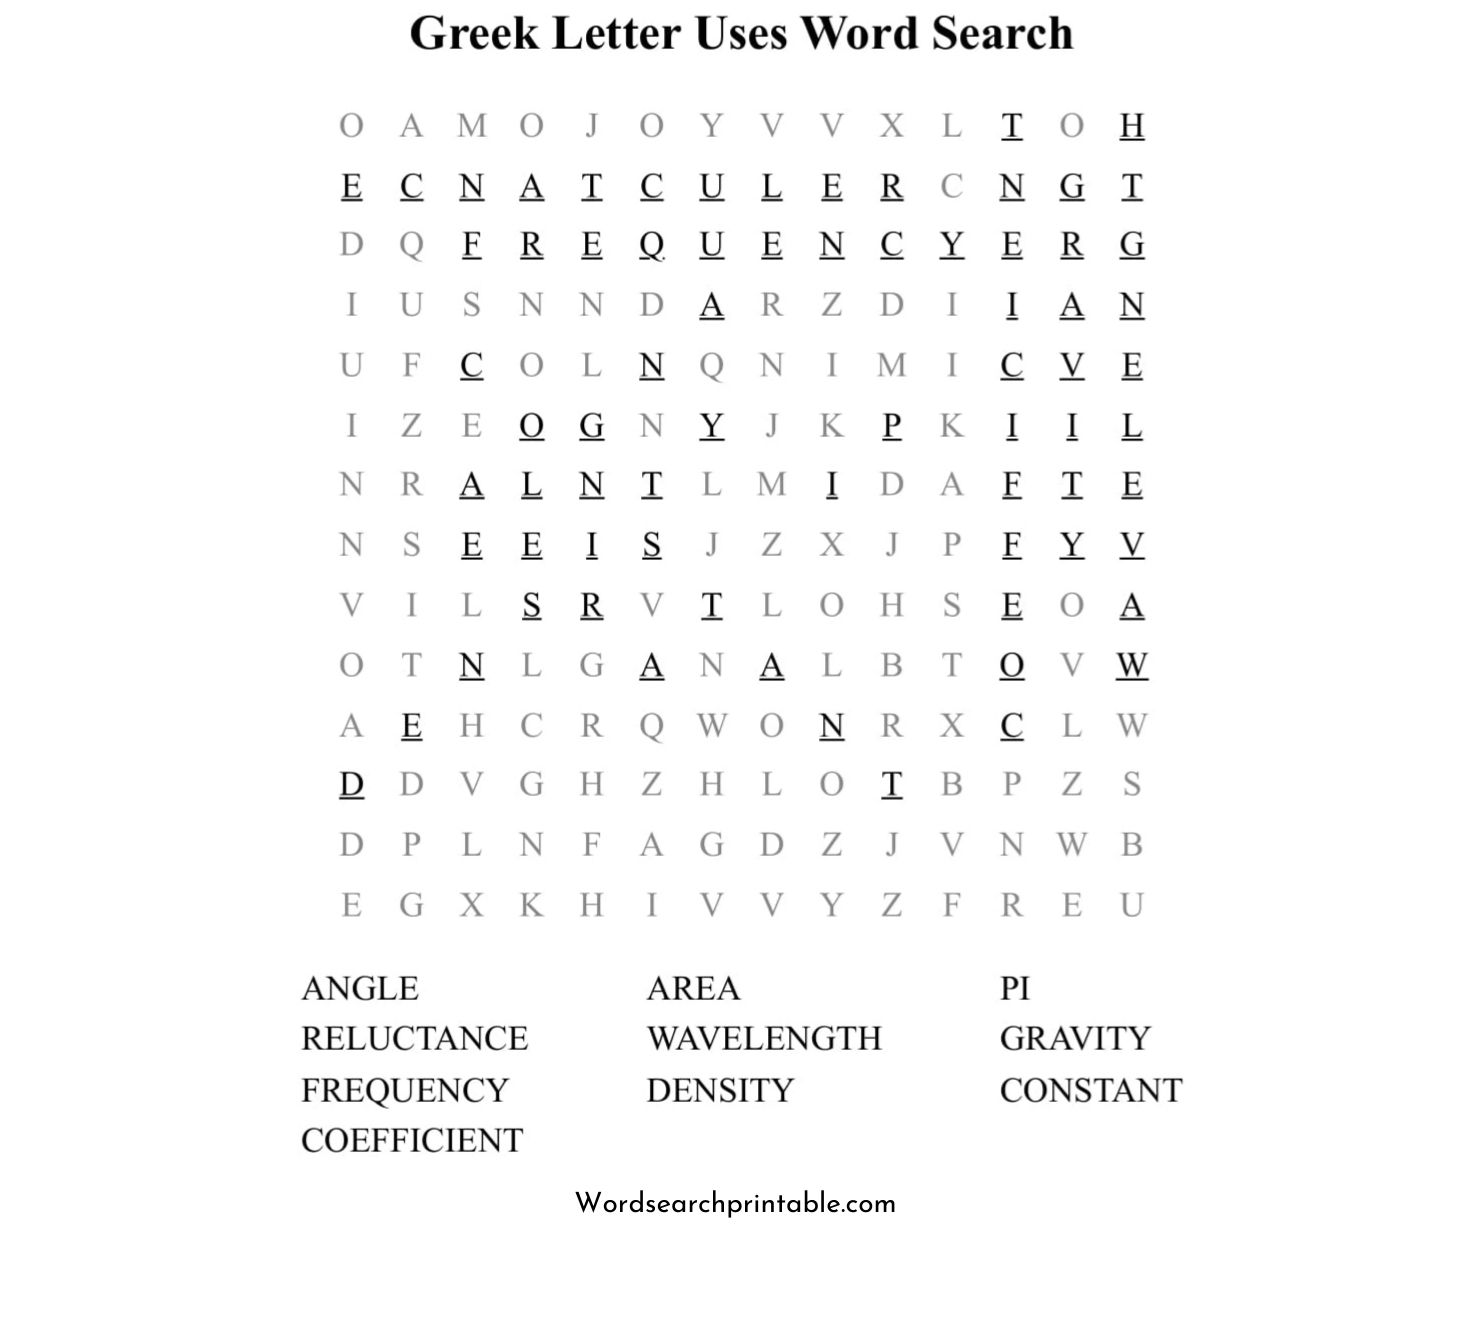 greek letter uses word search puzzle solution